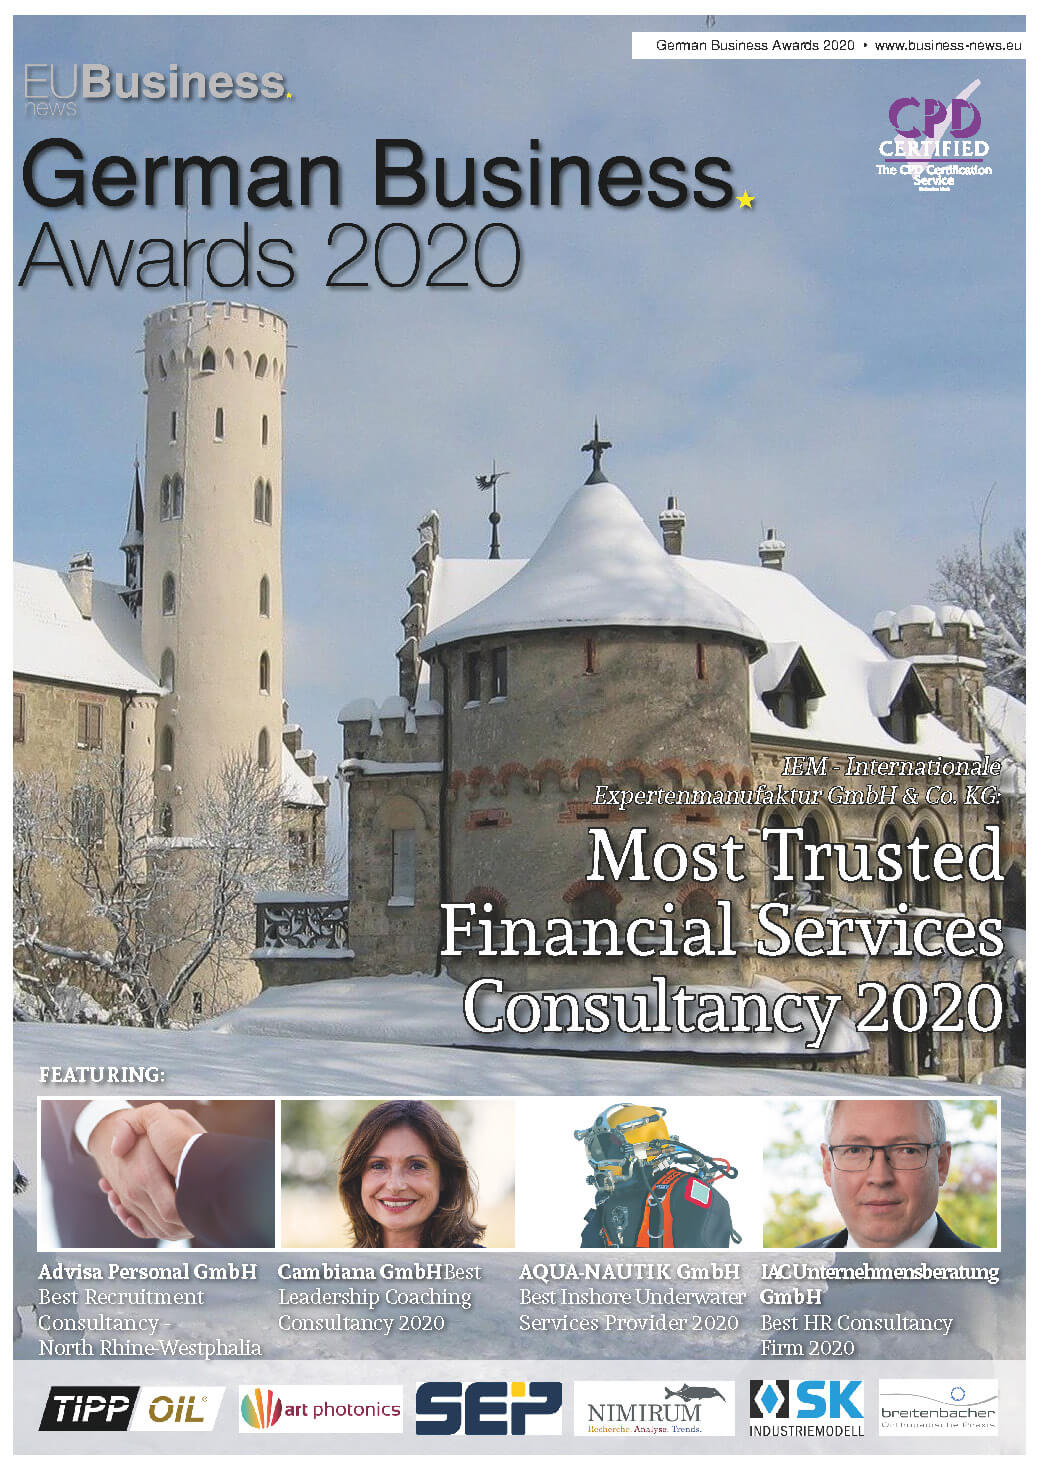 View the 2020 winners booklet